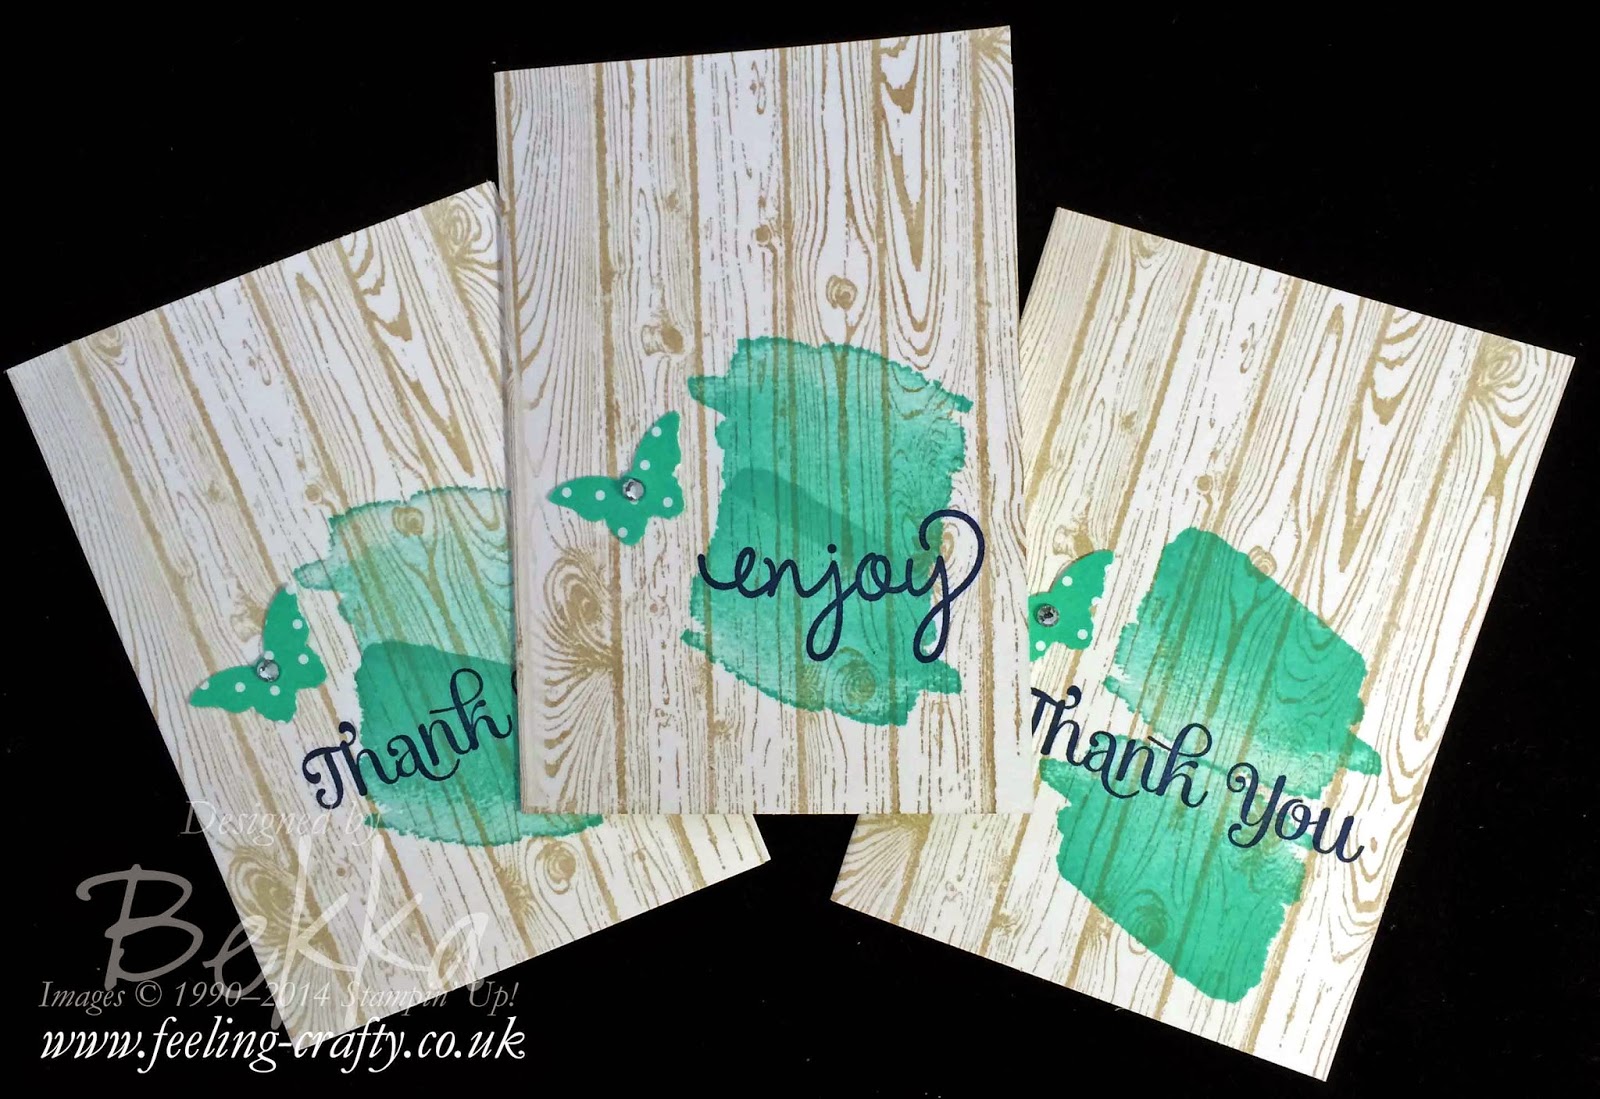 Simple Thank You Note Cards featuring Stampin' Up! Products - find out more here